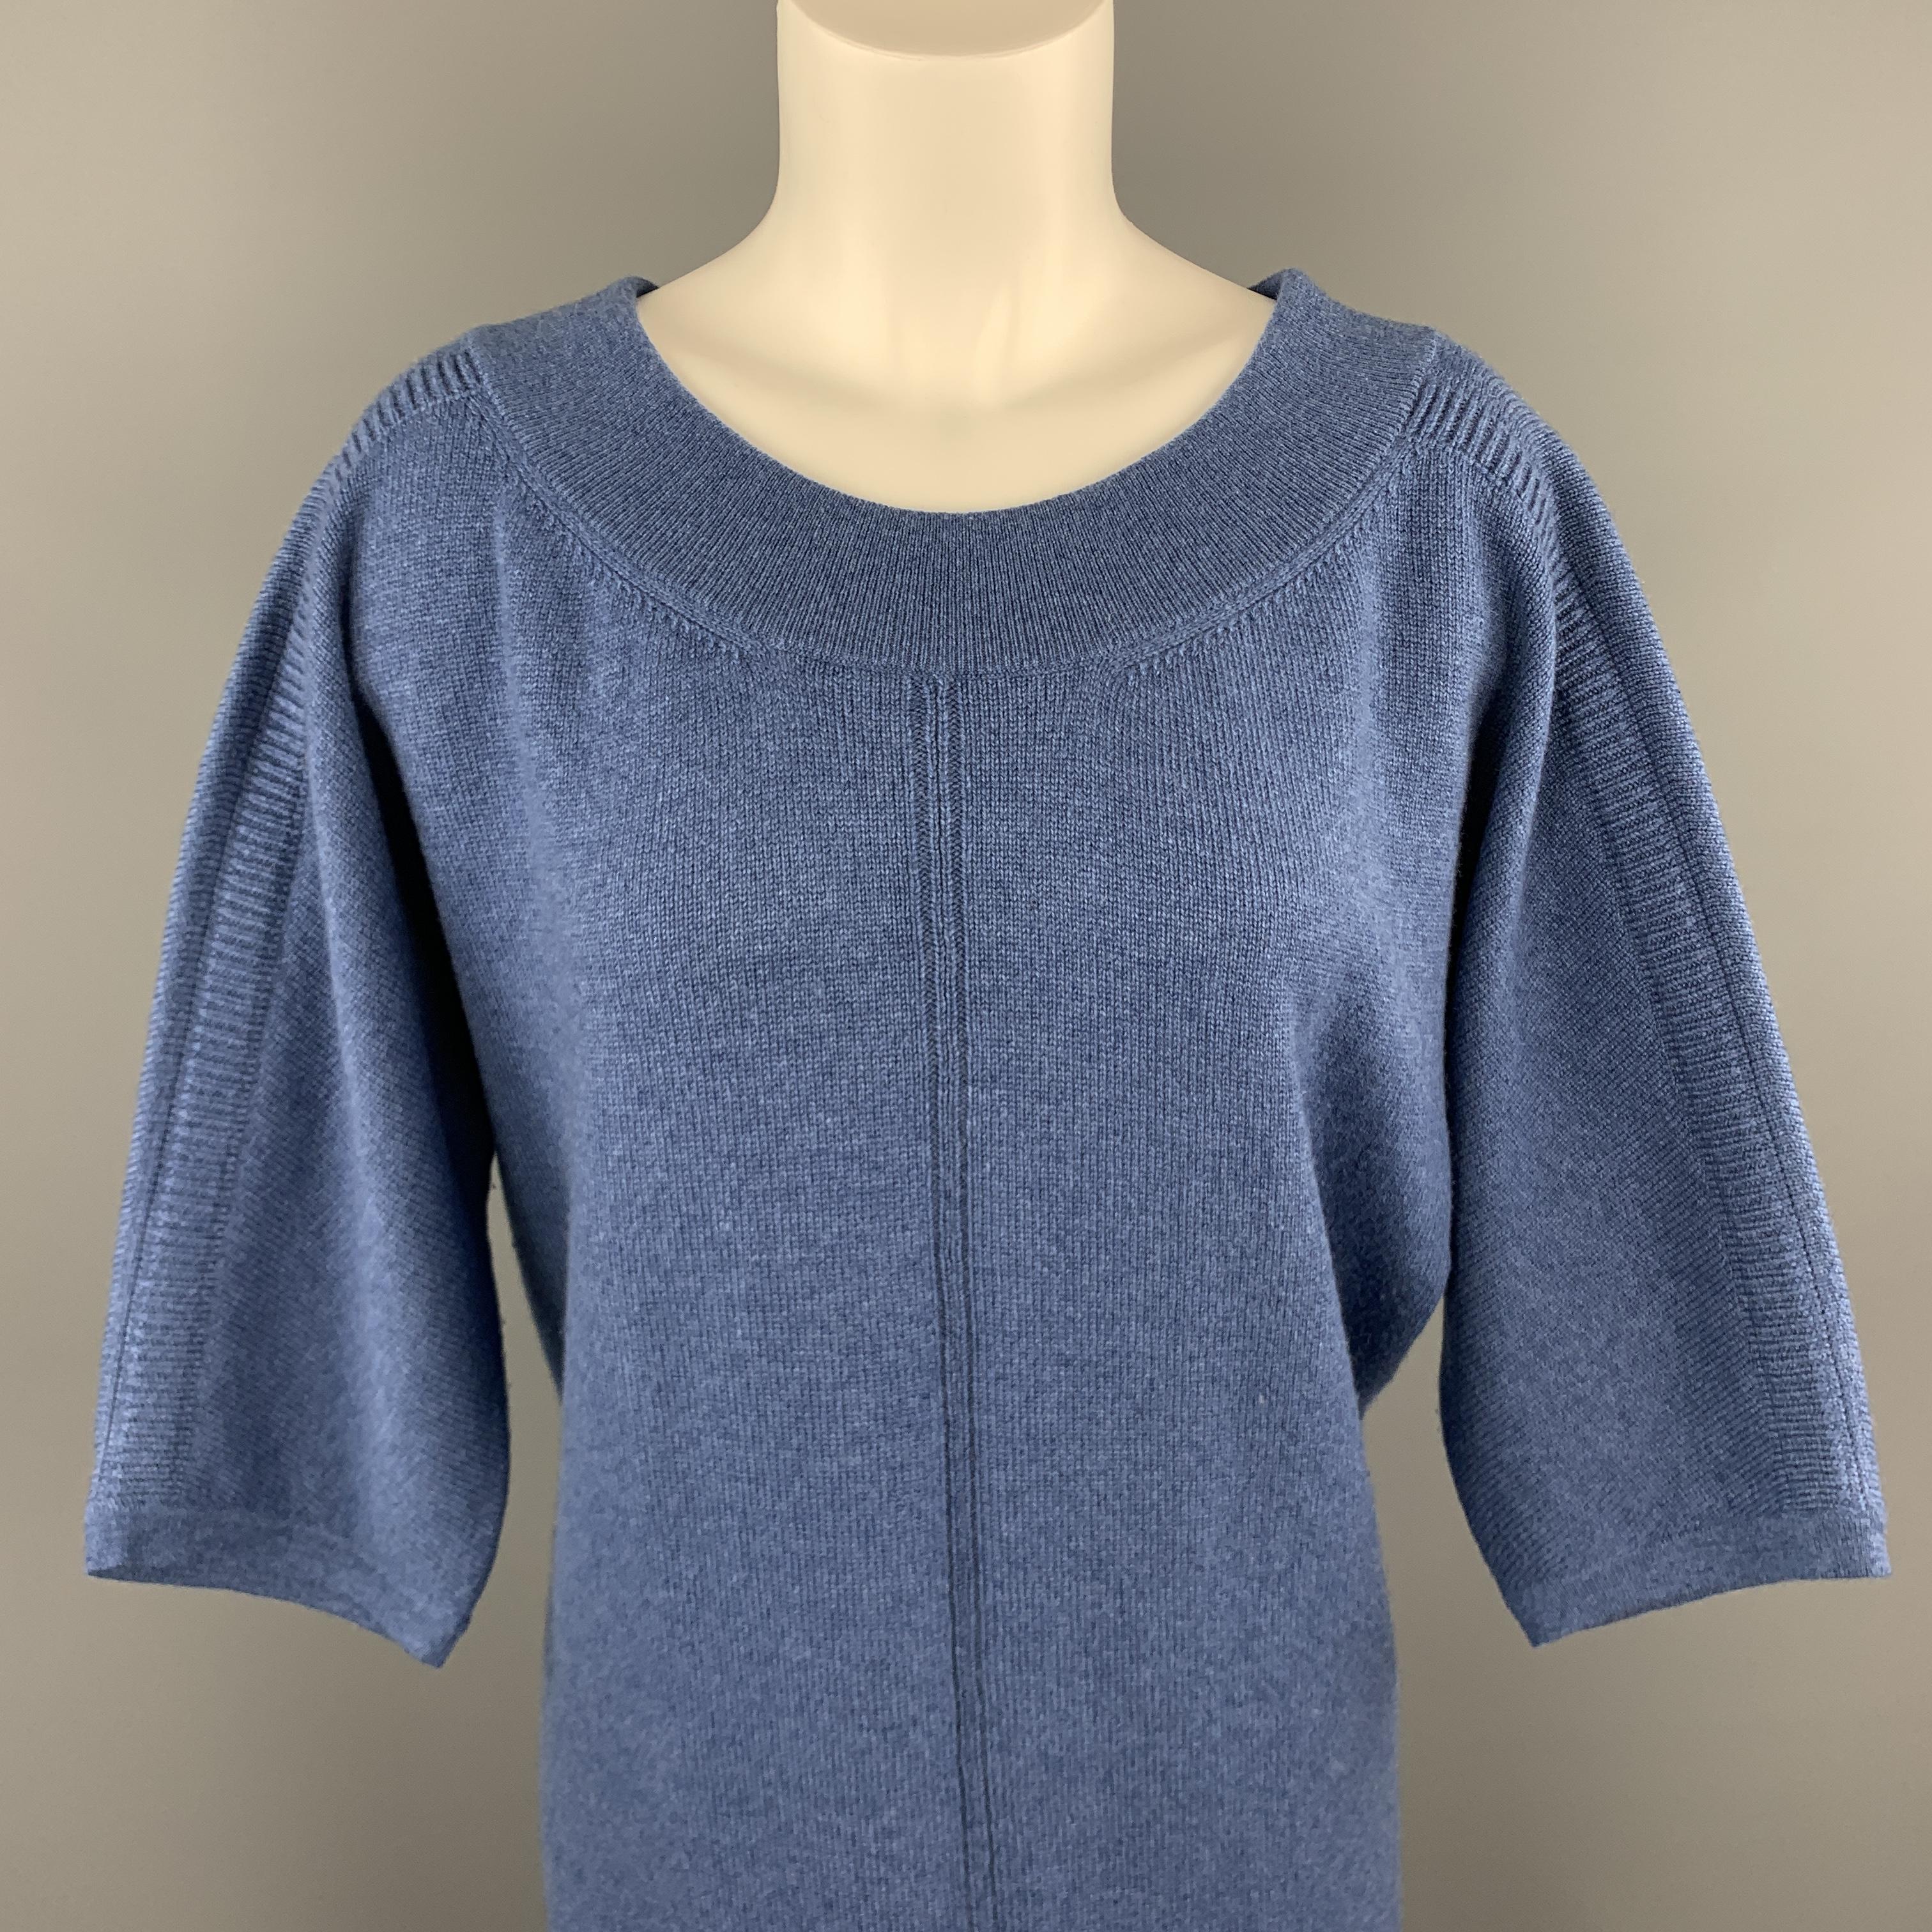 HERMES sweater comes in sky blue cashmere knit with a scoop neck, cropped sleeves, and oversized longline silhouette. Made in UK.

Excellent Pre-Owned Condition.
Marked: EU 38

Measurements:

Shoulder: 18 in.
Bust: 46 in.
Waist: 44 in.
Sleeve: 14